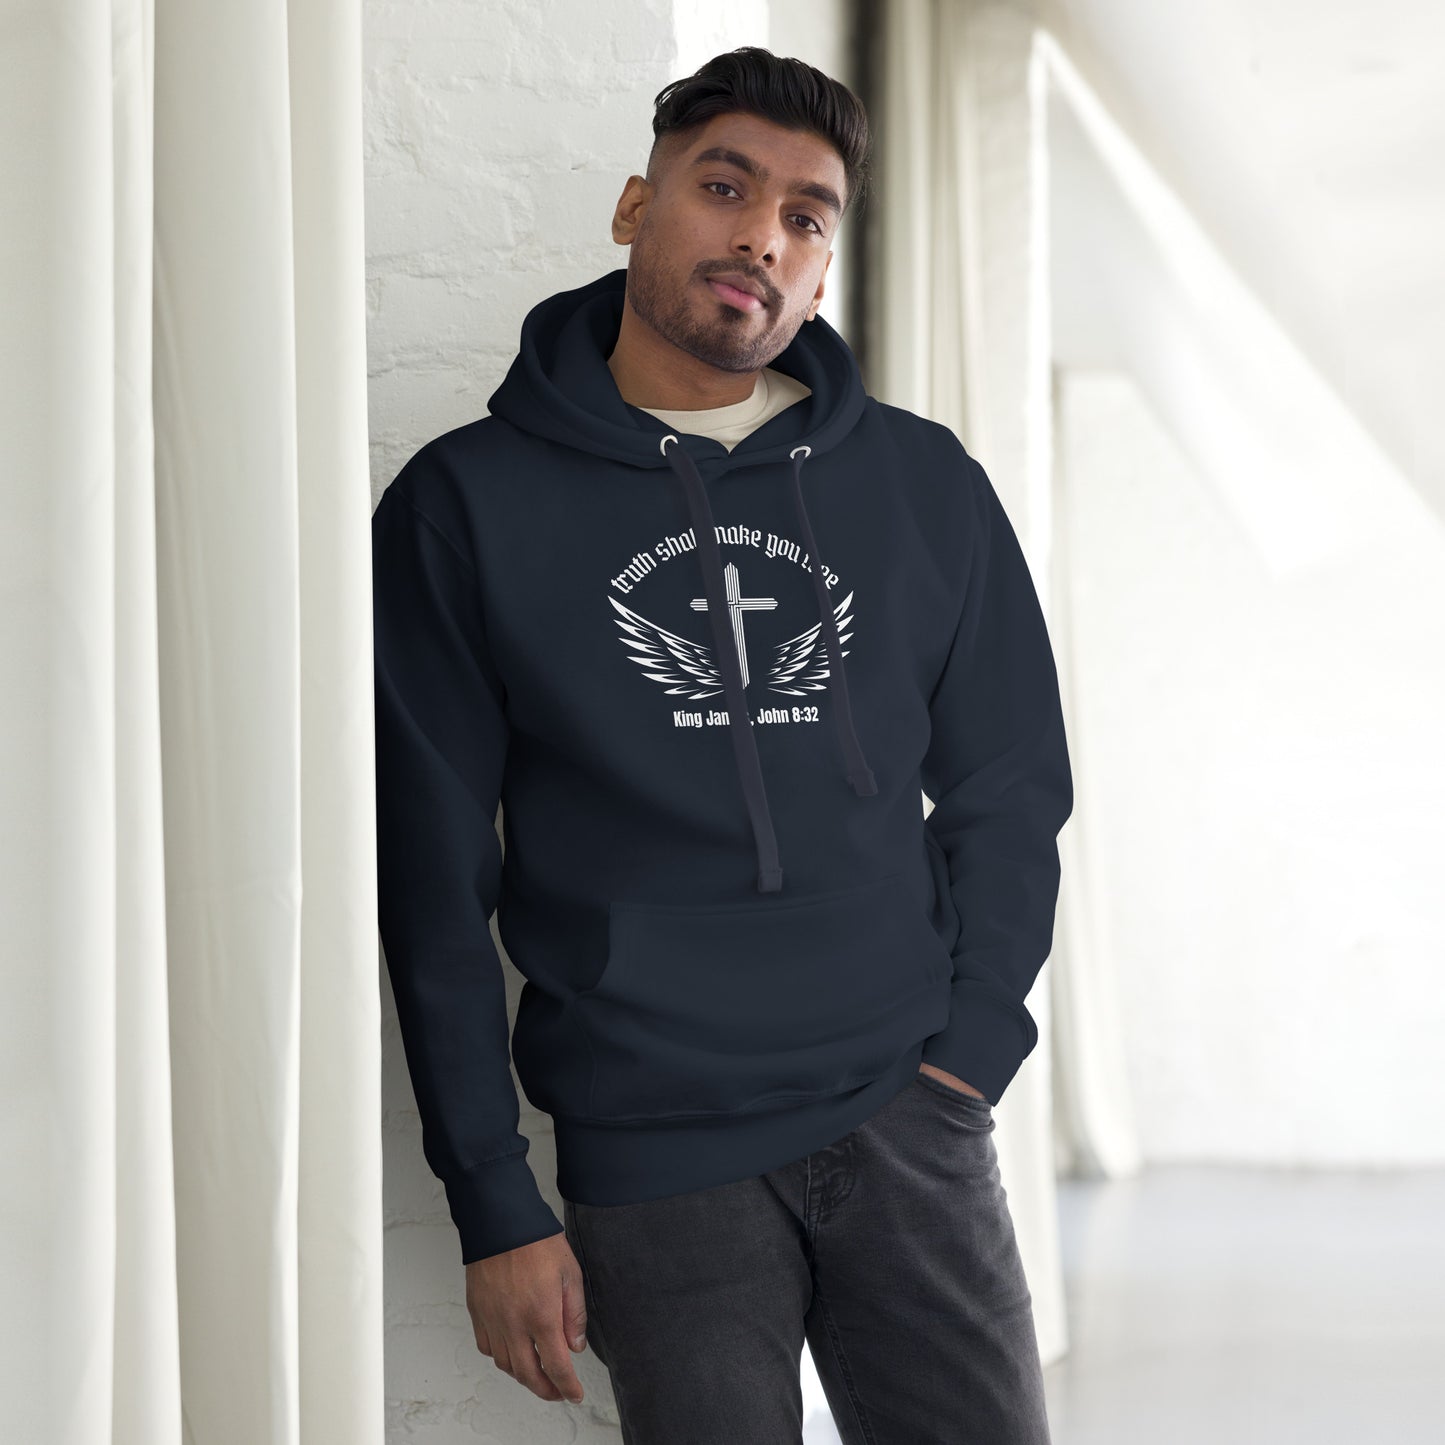 Truth Shall Make You Free Unisex Hoodie